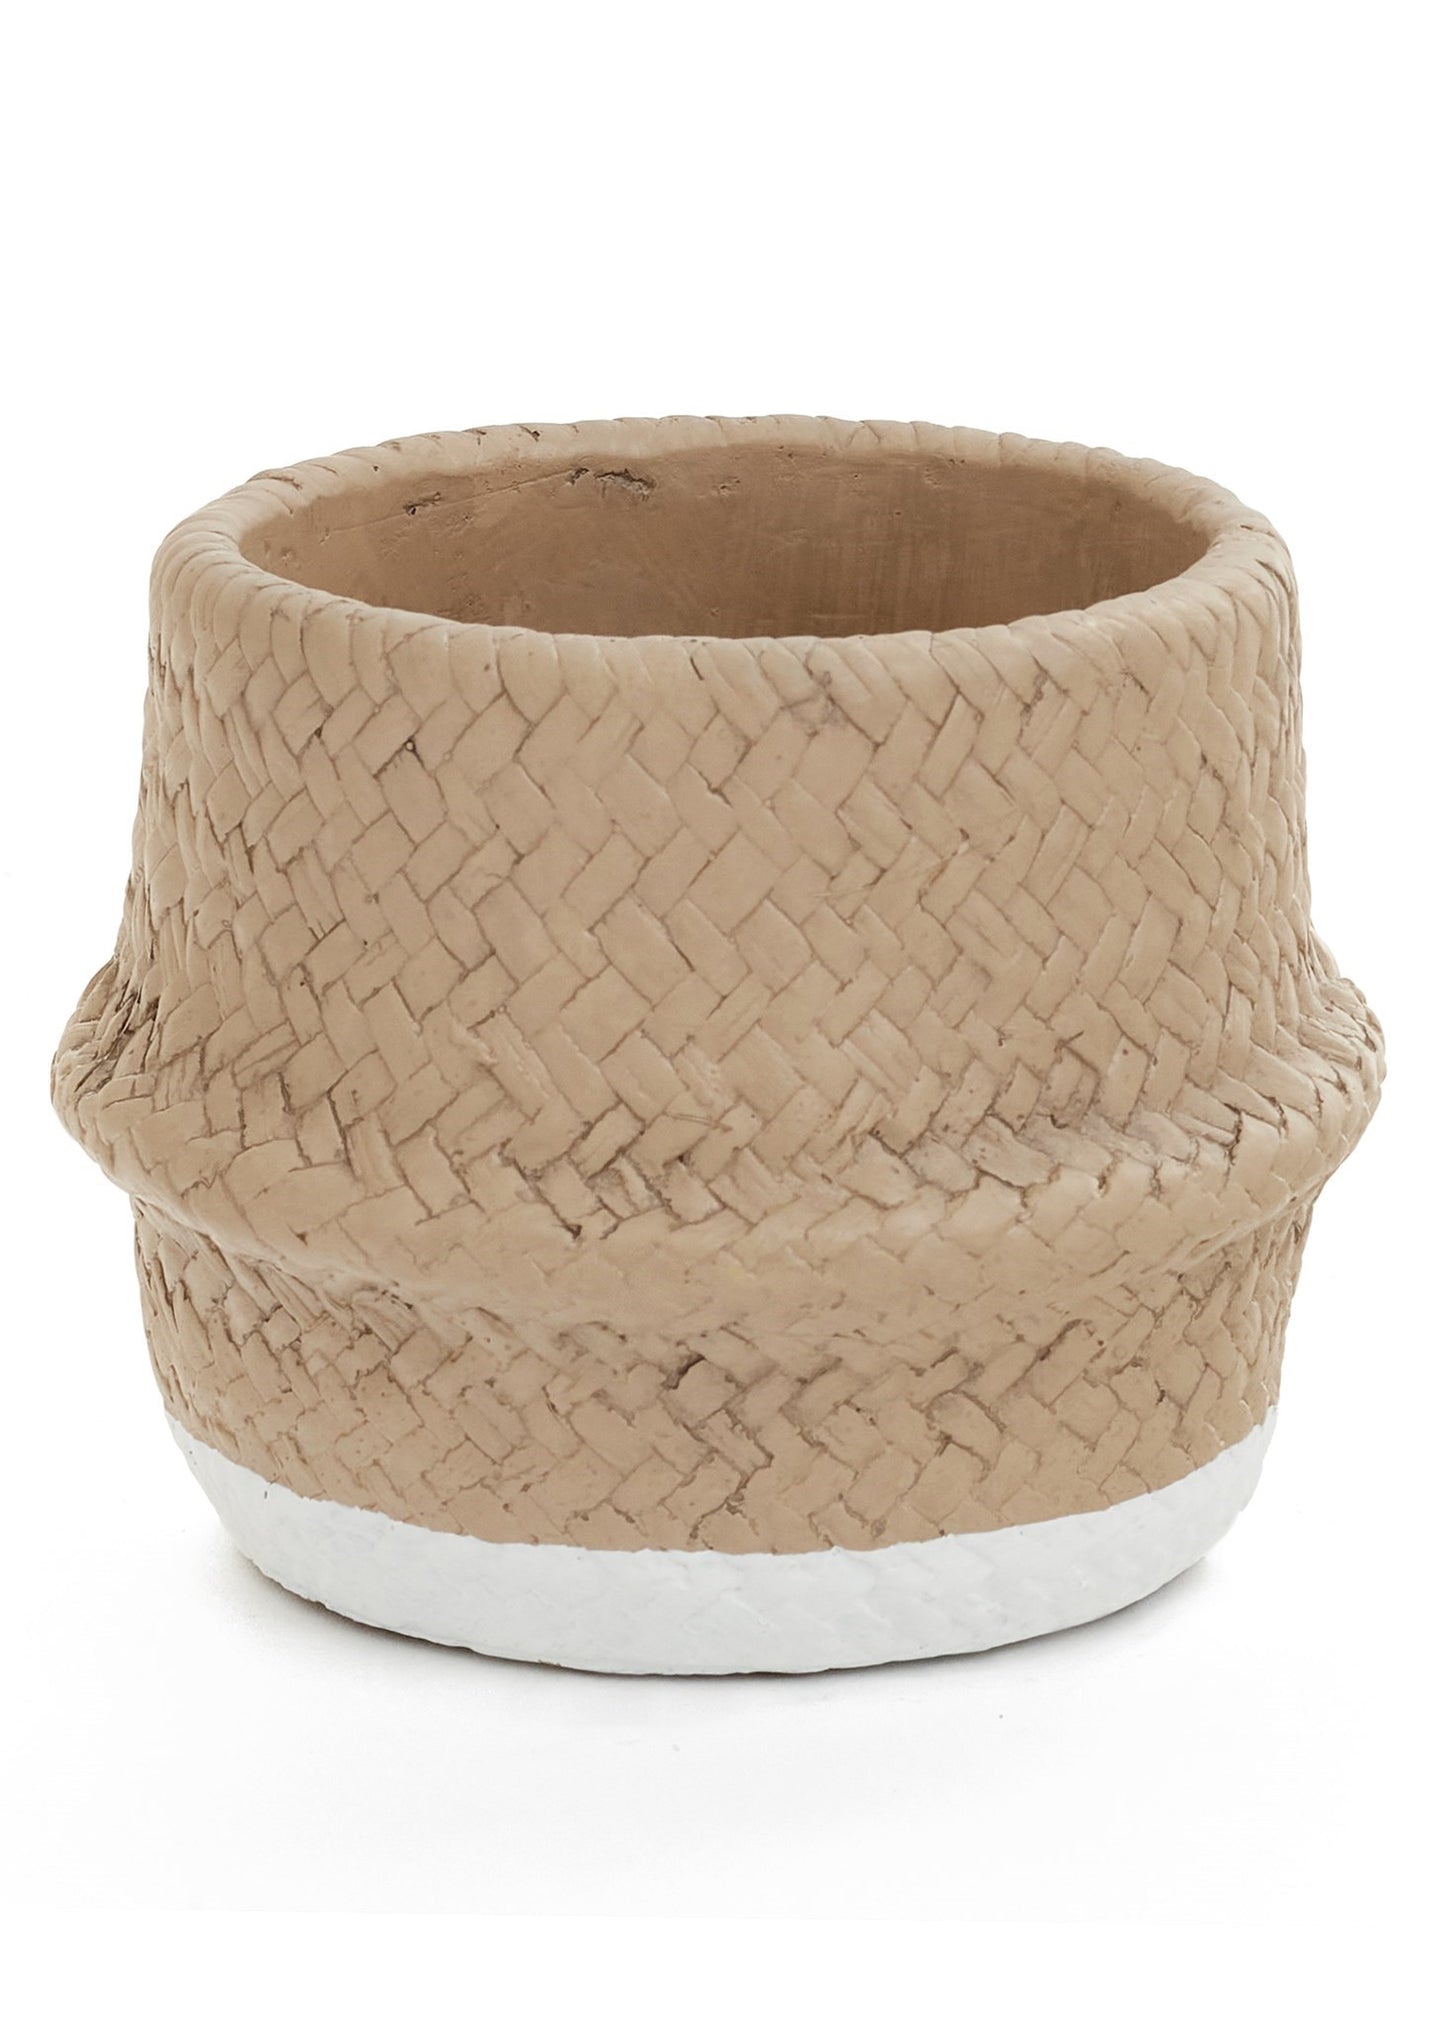 beige and white cement planter that looks woven like a basket